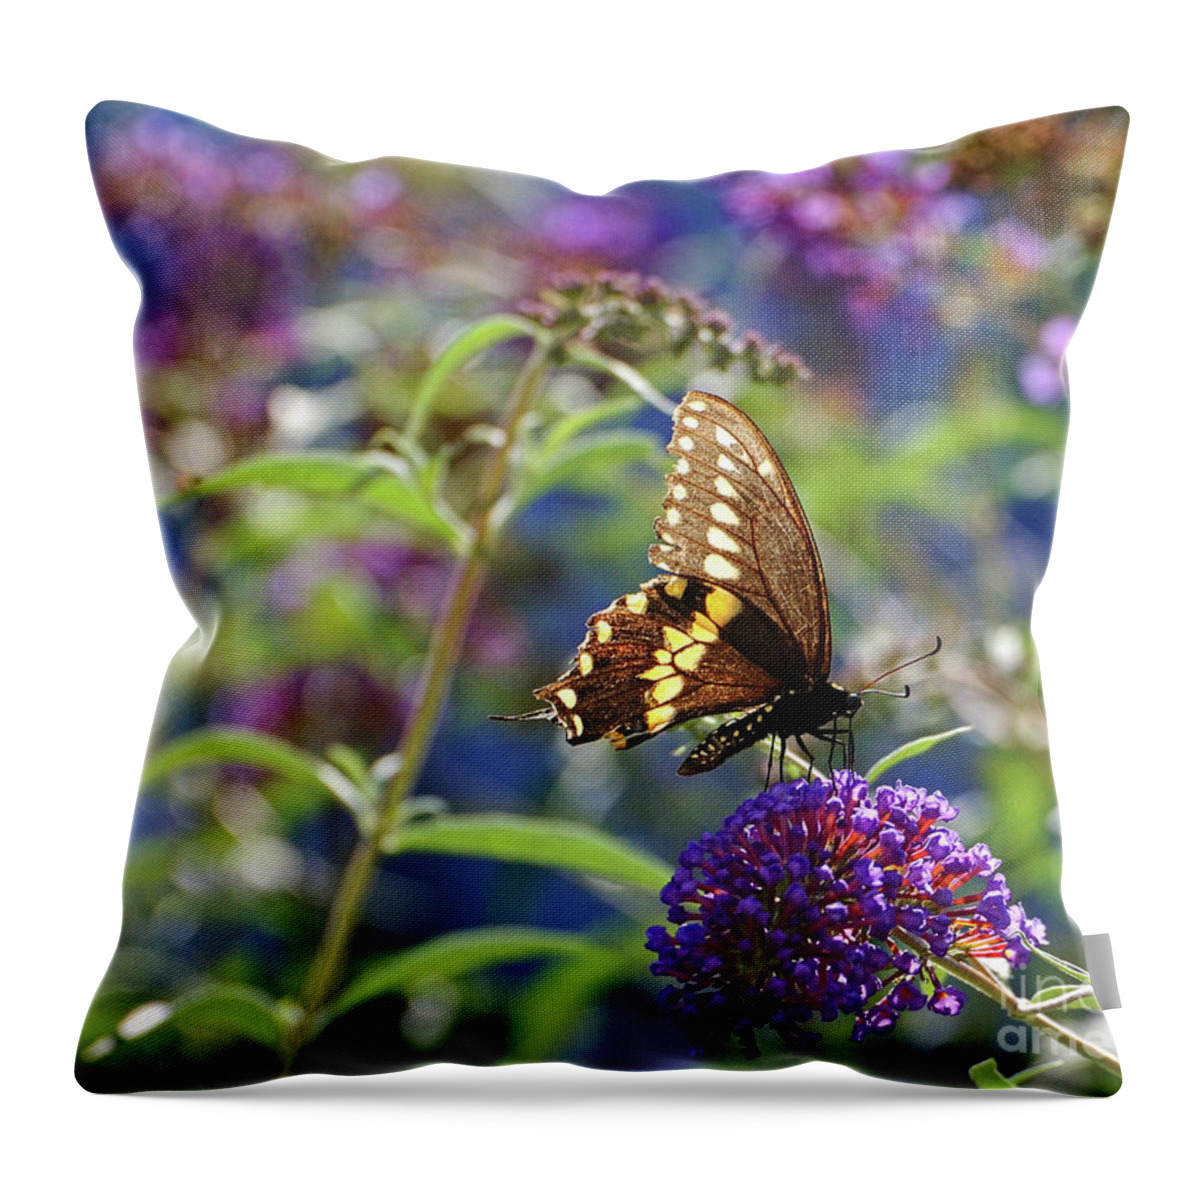 Butterfly Throw Pillow featuring the photograph Black Swallowtail Glow by Edward Sobuta